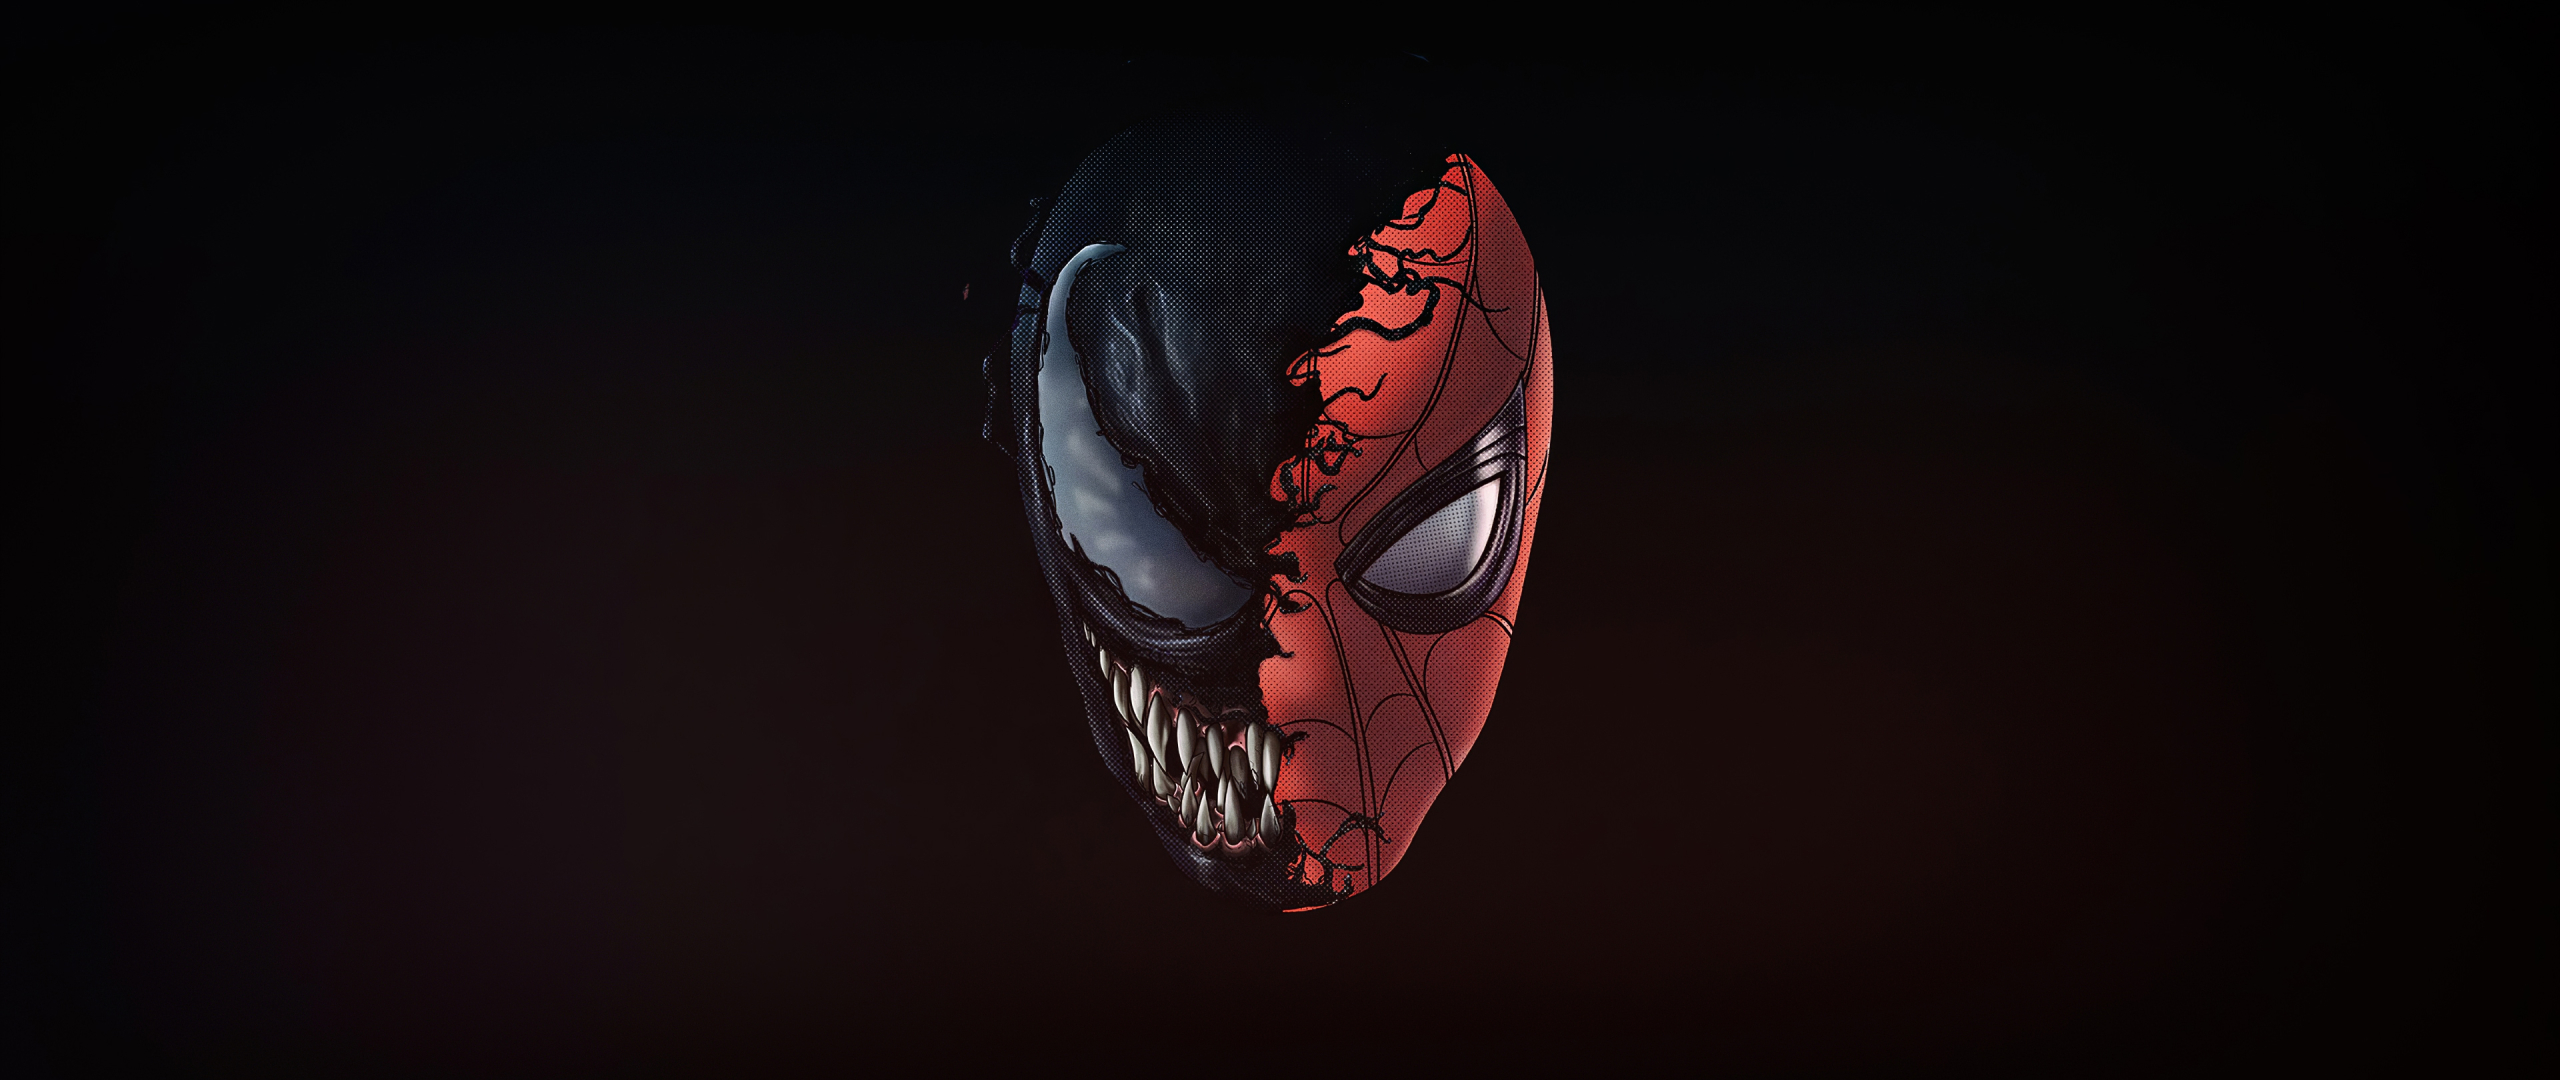 2560x1080 Venom x Spiderman 4K 2560x1080 Resolution Wallpaper, HD  Superheroes 4K Wallpapers, Images, Photos and Background - Wallpapers Den